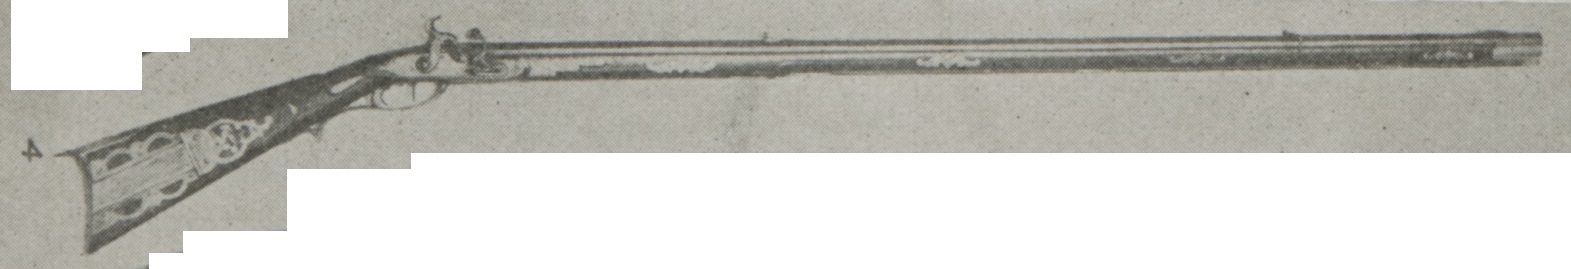 This is a 1921 halftone image of a silver-mounted rifle that is marked 'Jacob Ruslin'. It is believed to have been made by Samuel Spangler, a gunsmith who worked in Somerset County, Pennsylvania before moving to Wisconsin.